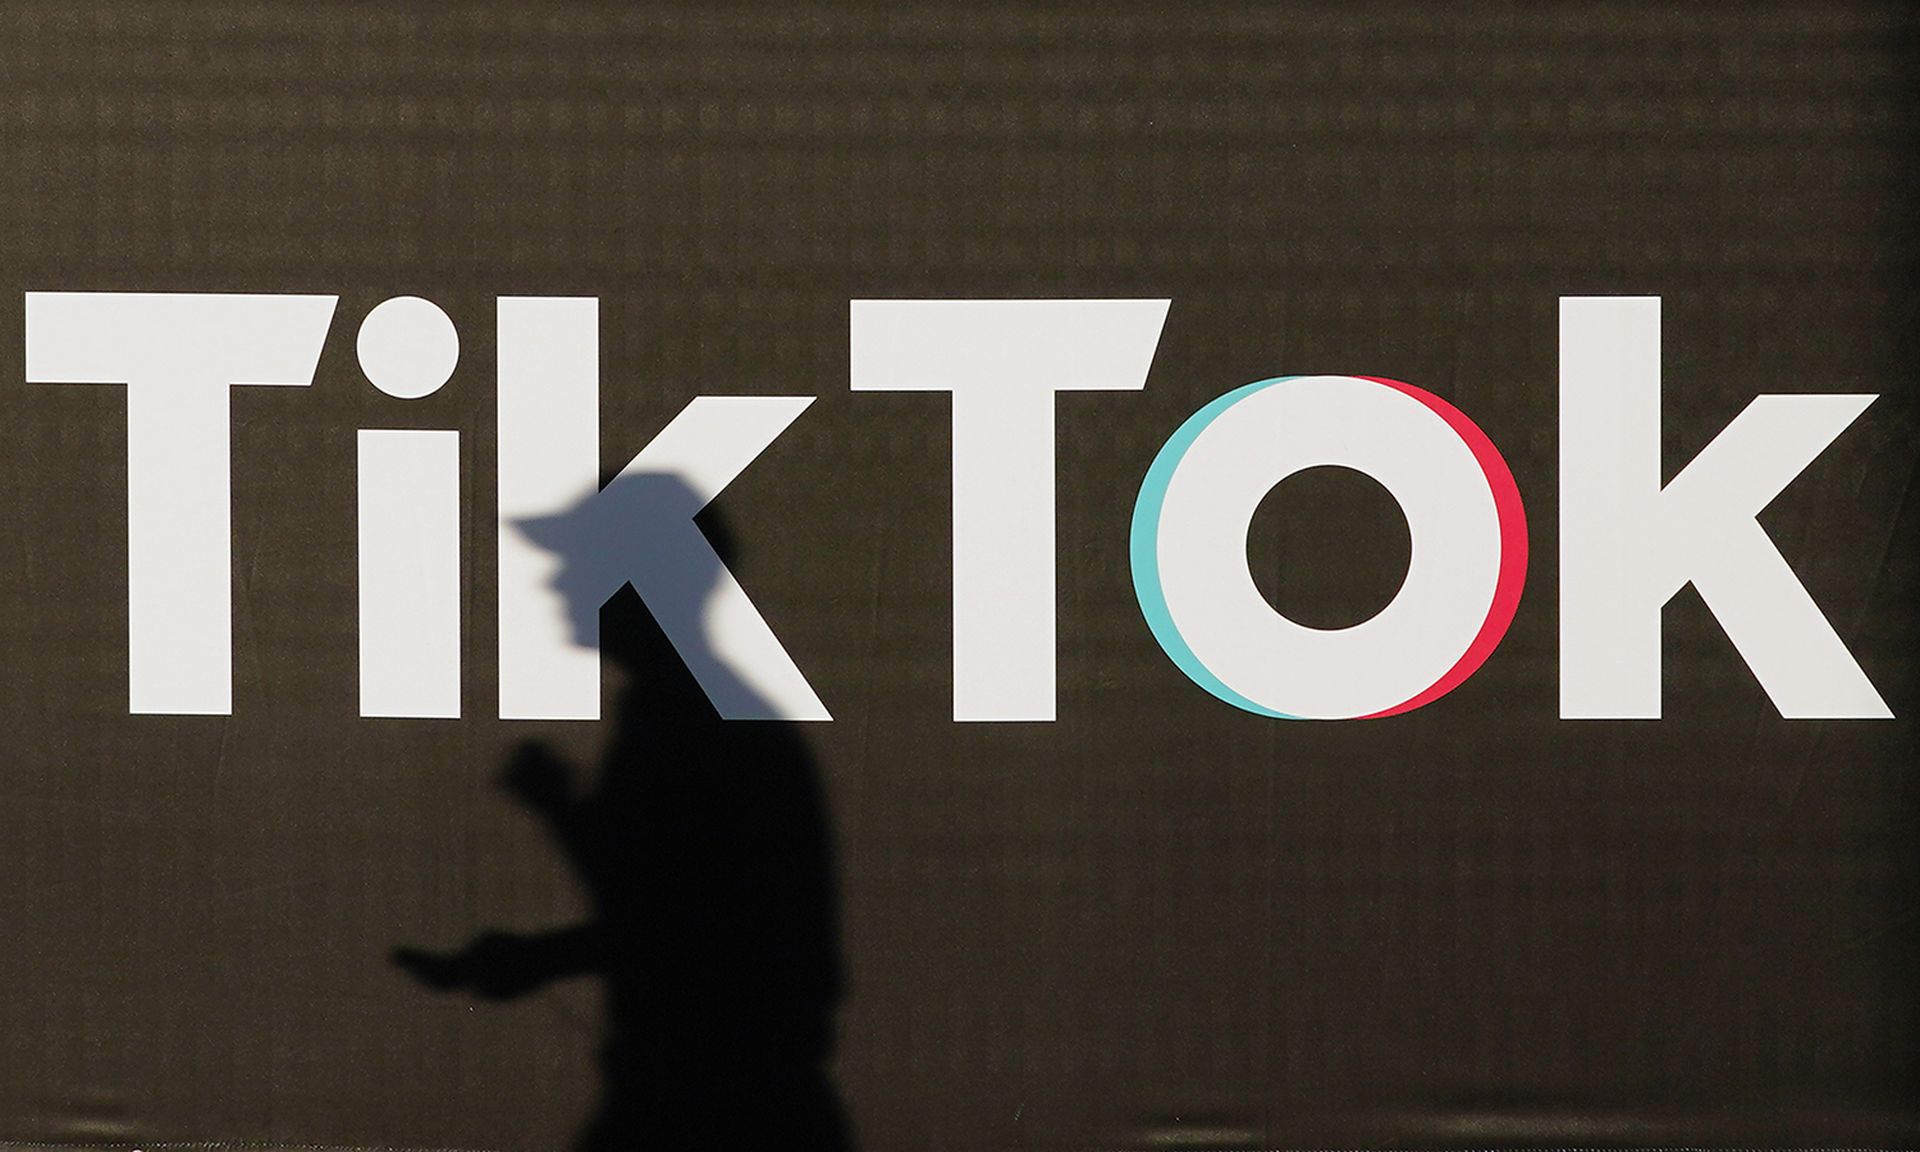 A young man holding a smartphone casts a shadow as he walks past an advertisement for social media company TikTok.